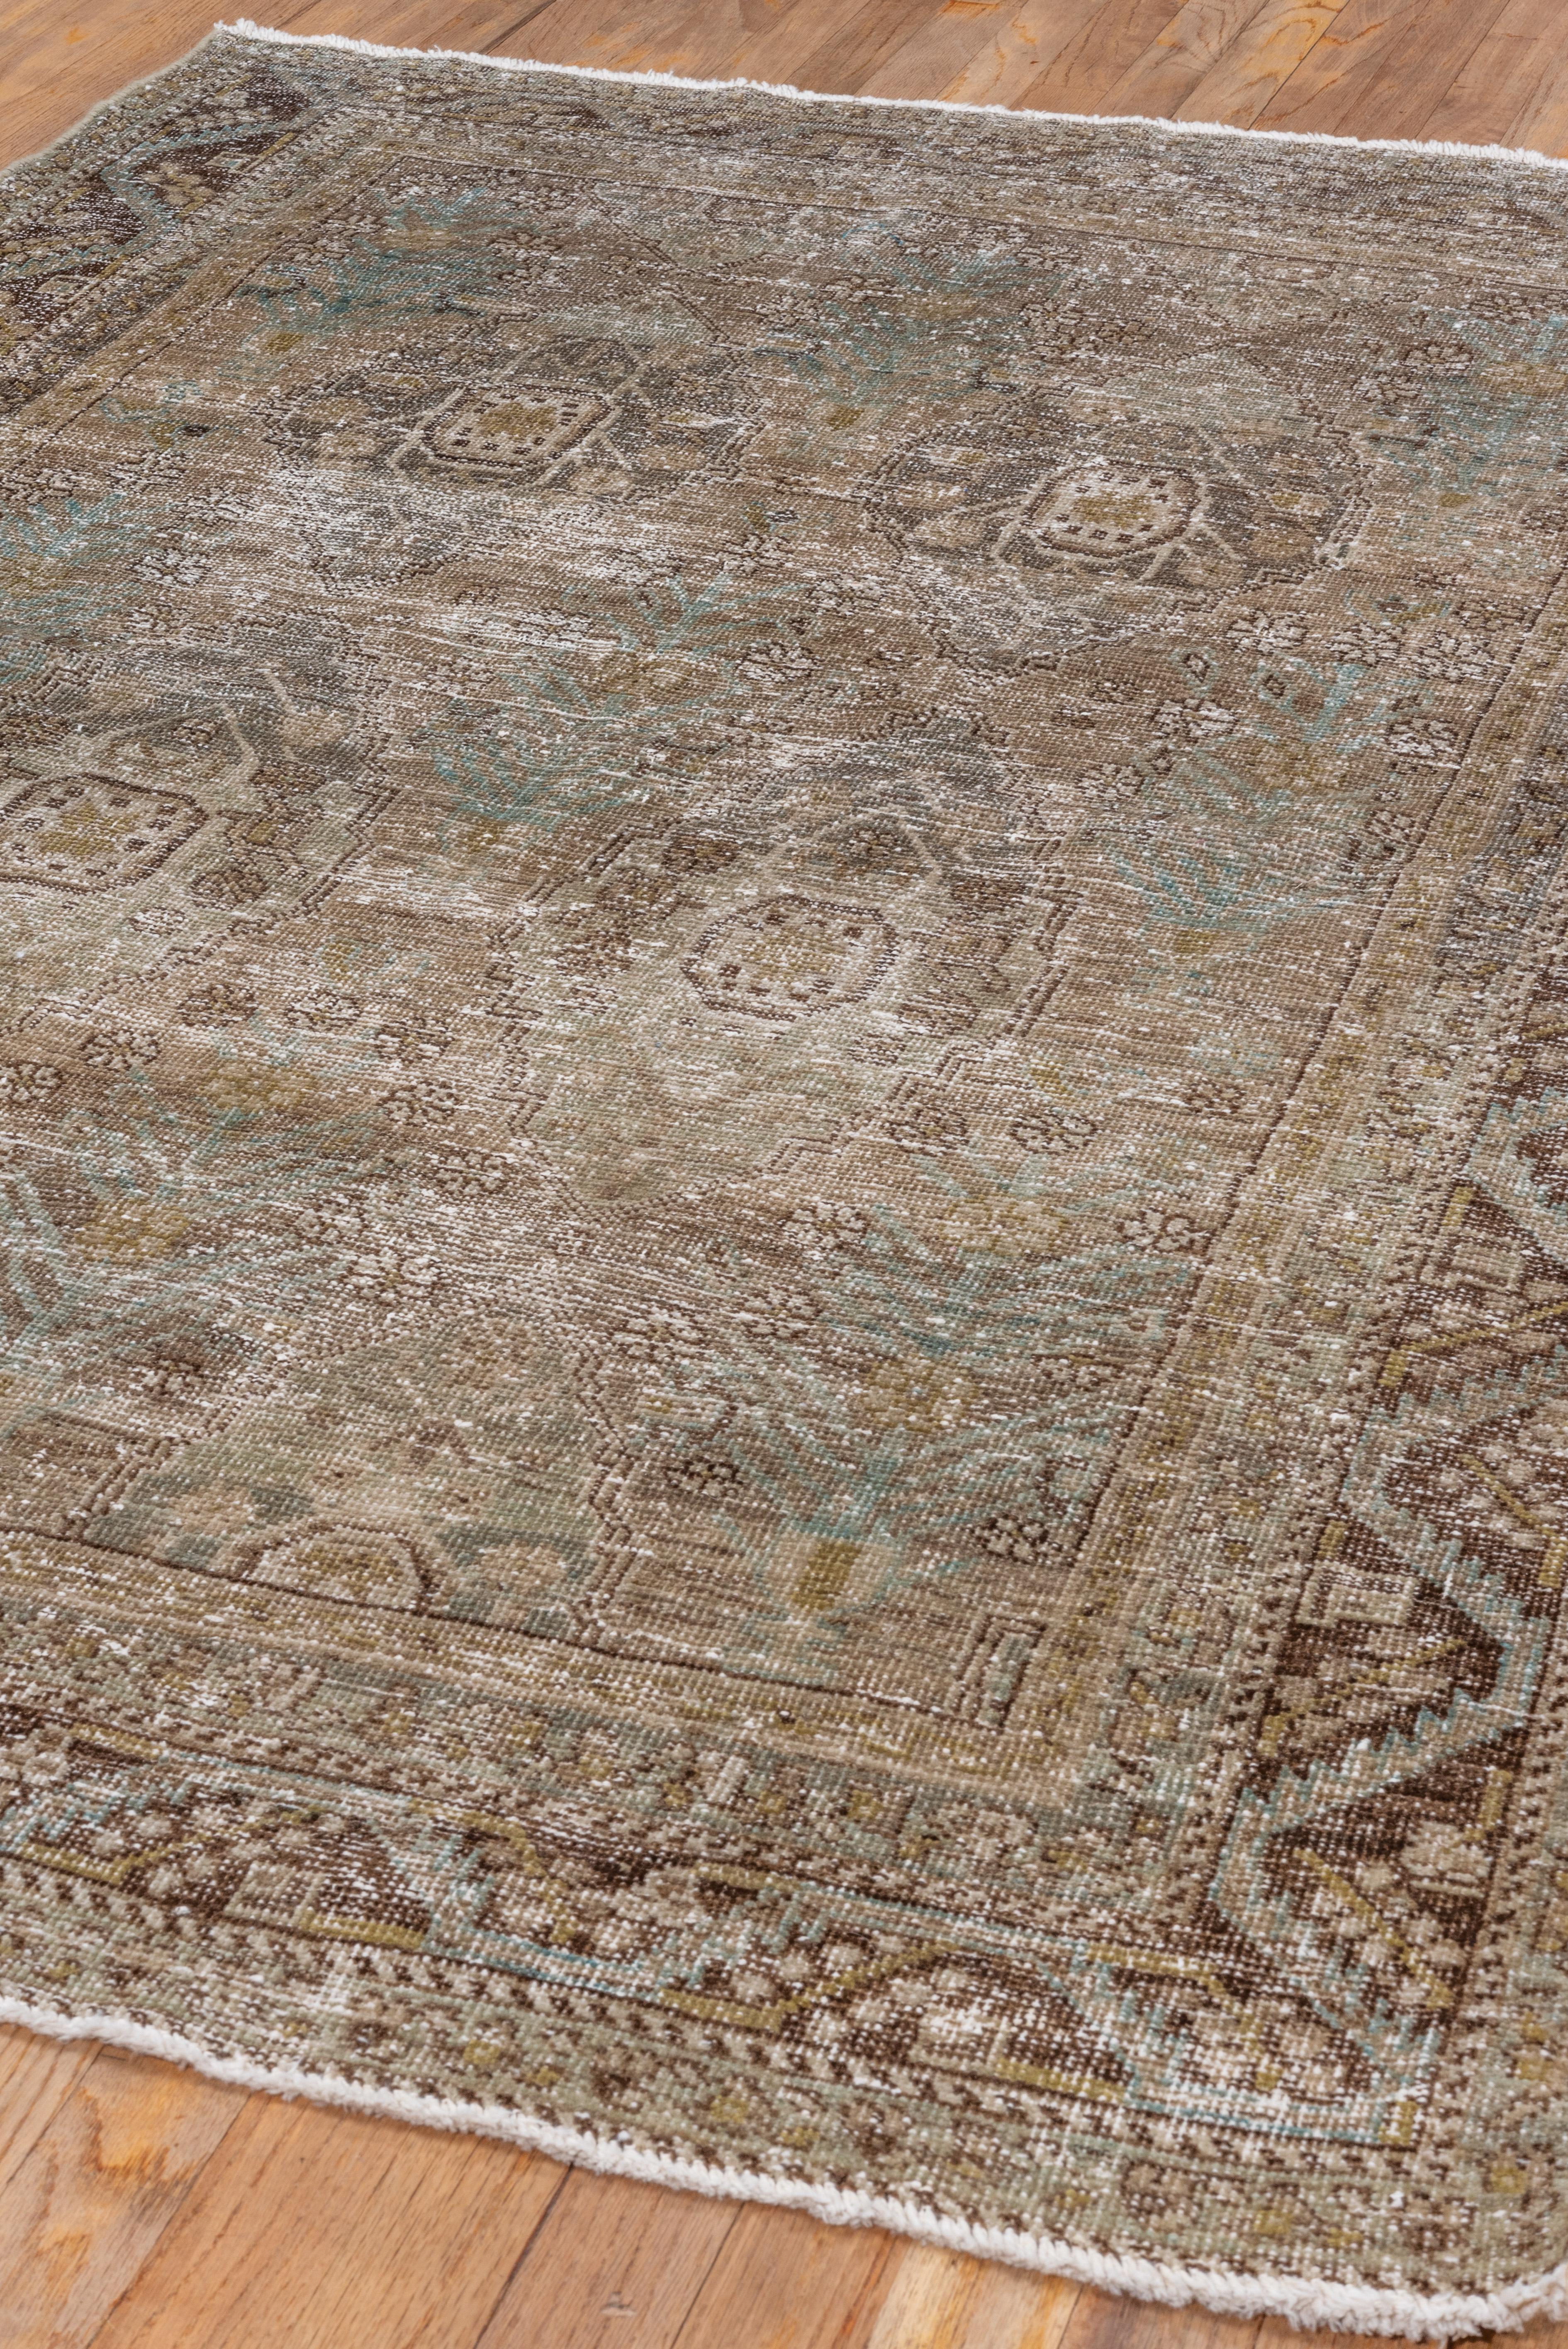 Hand-Knotted 1920s Distressed Antique Turkish Sivas Rug, Earth Tones, Light Blue Accents For Sale